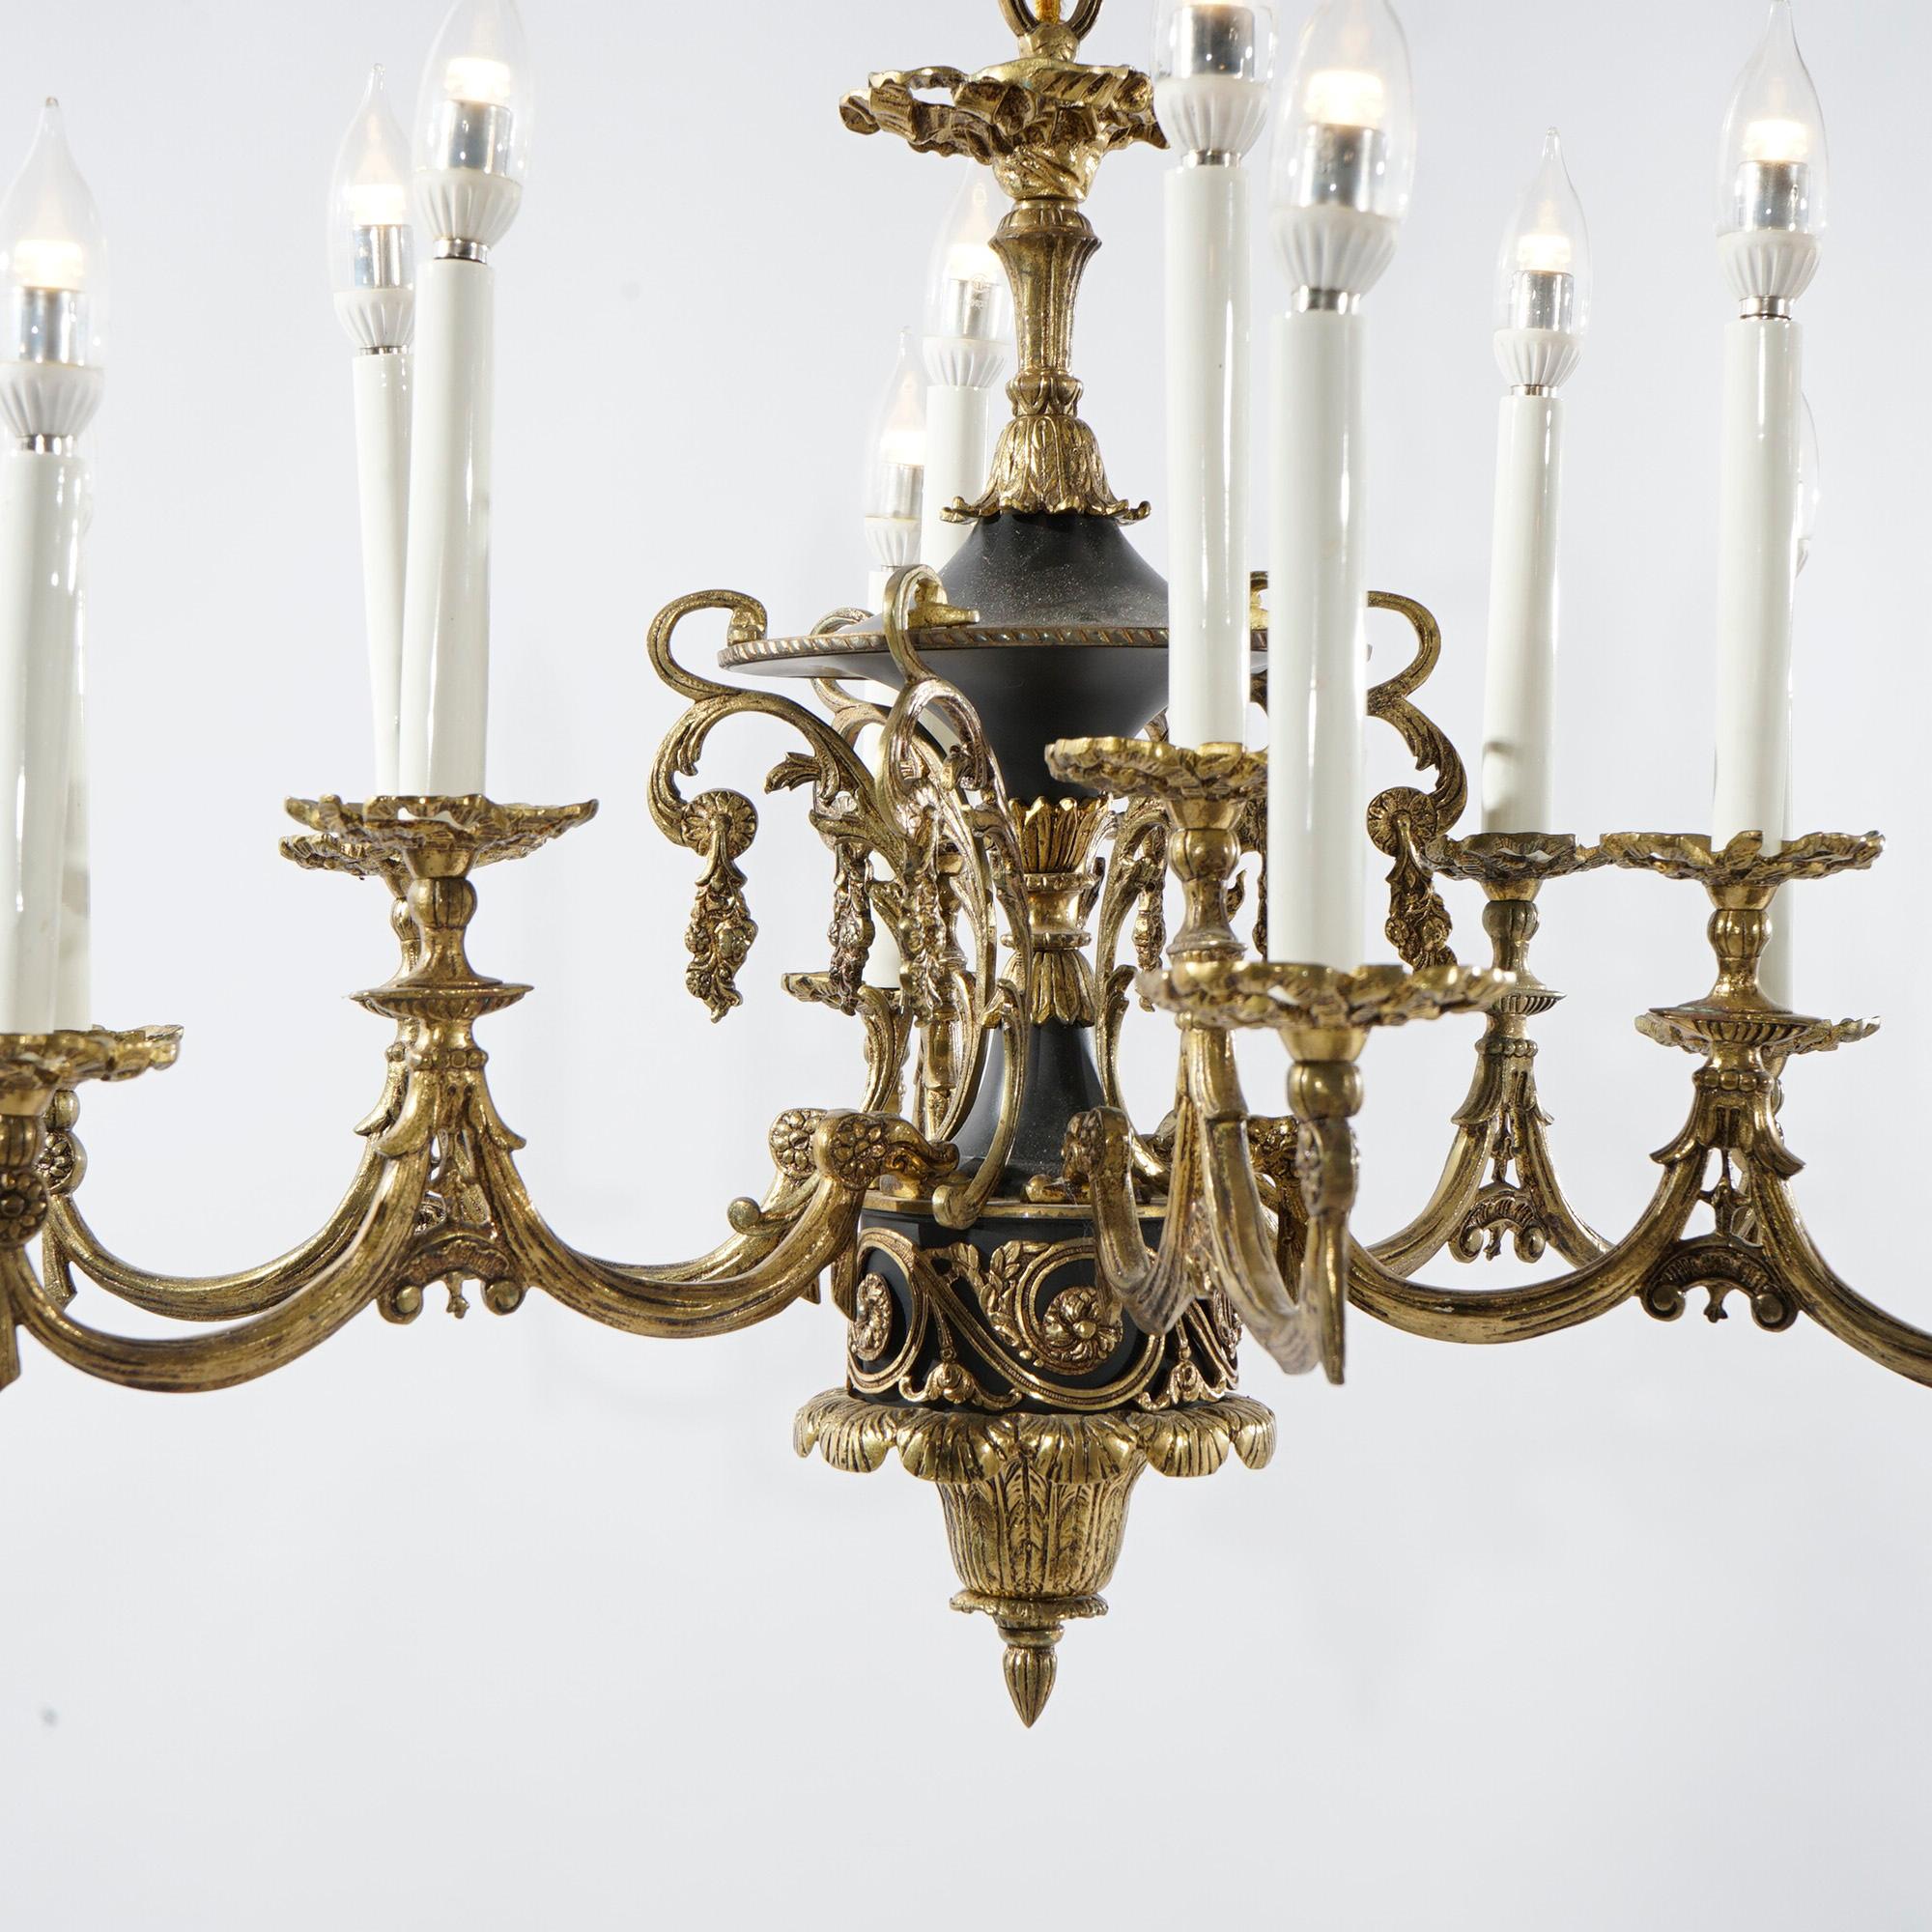 Antique French Empire Style Ebonized Bronze Twelve-Light Chandelier, Early 20thC For Sale 3